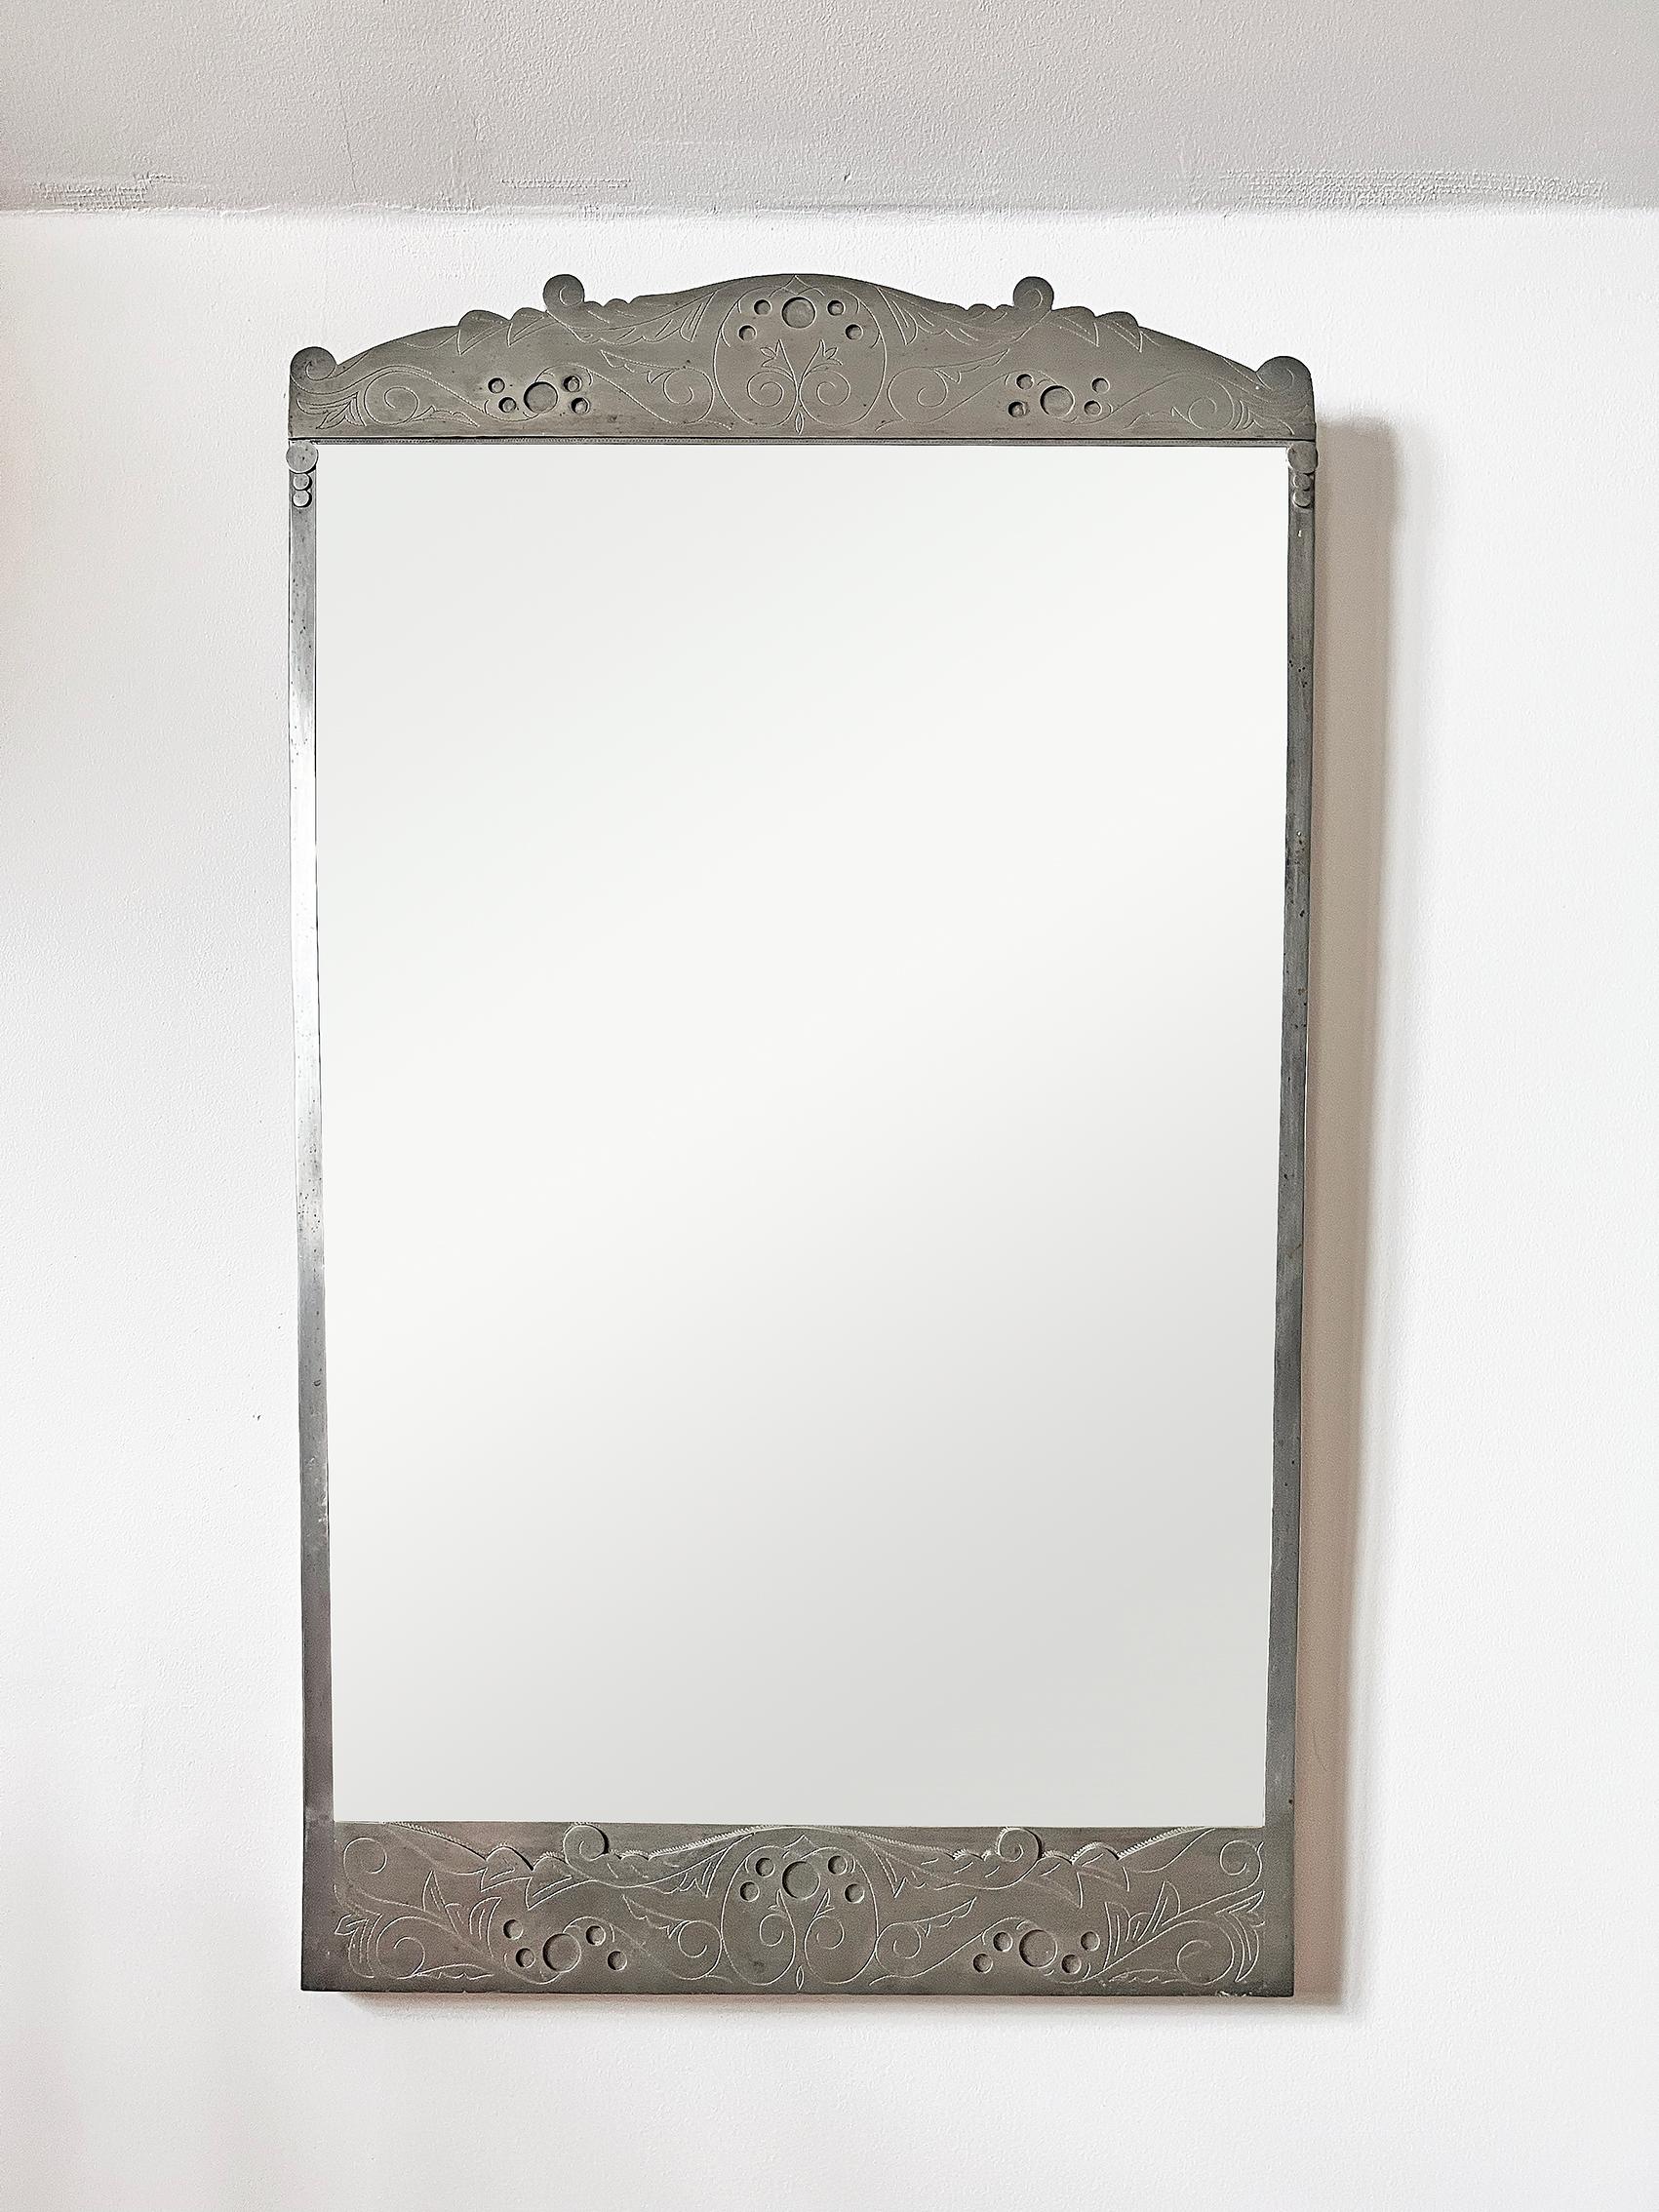 Amazing and very rare wall mirror in pewter from Swedish CAM - 1929.
Very decorative piece. 
Signed with makers mark on the back. 
Please notice a discreet inscription on the back. 
Good vintage condition.
Mirror glass: wear and patina